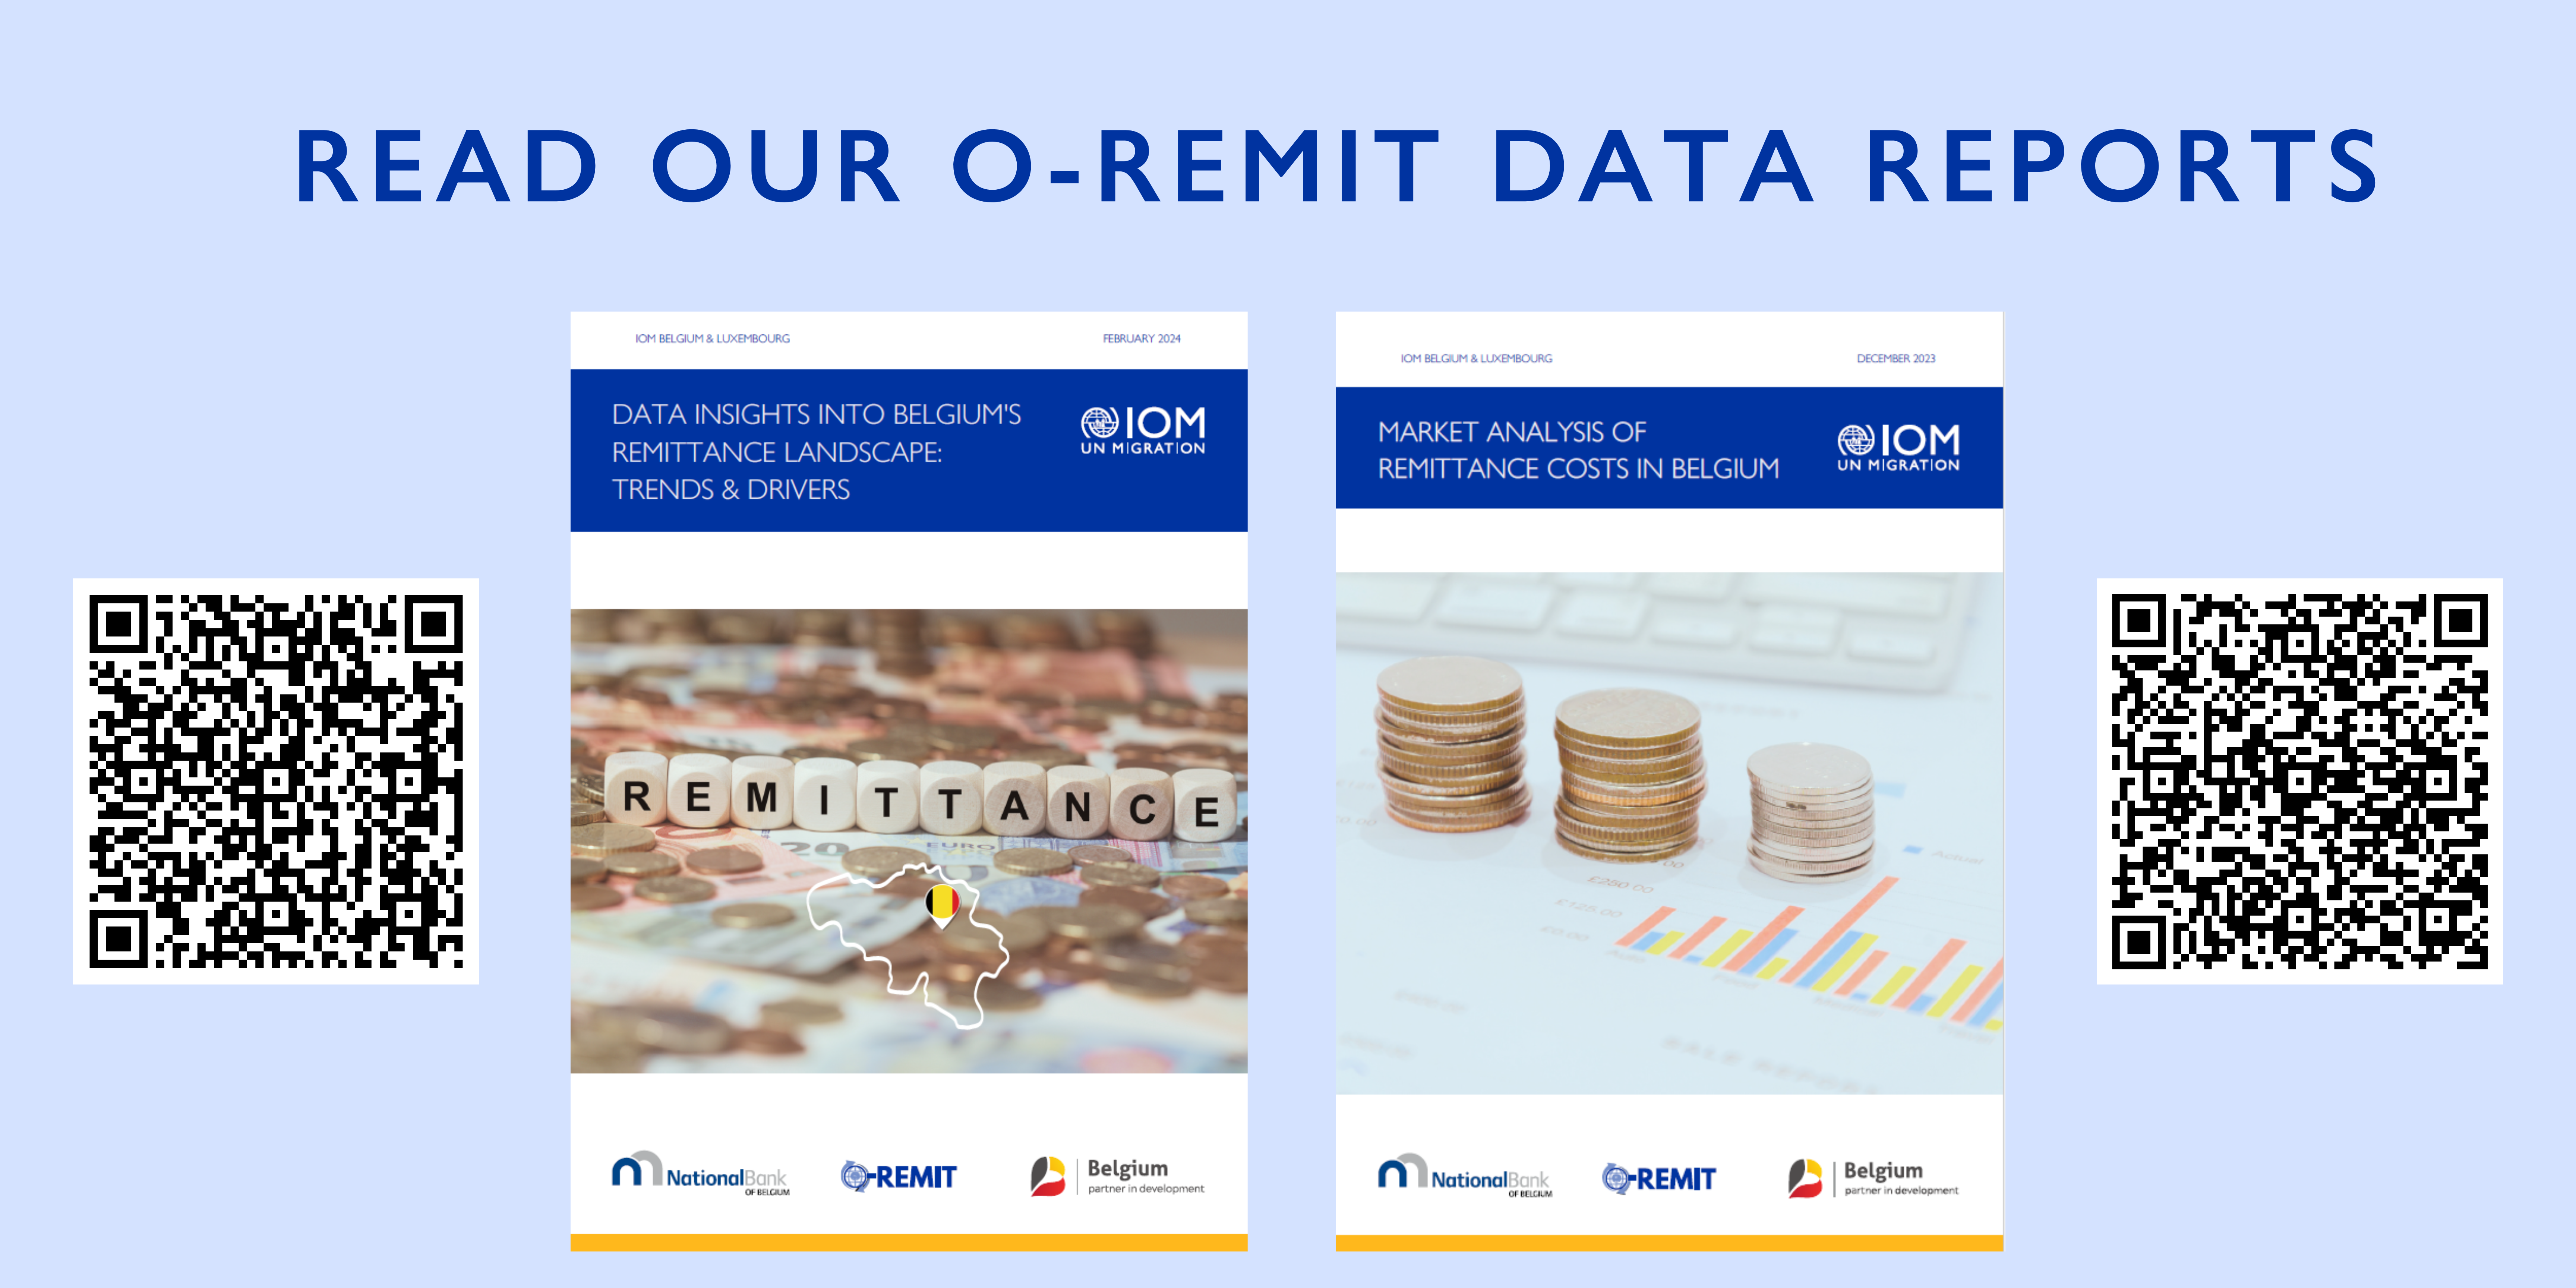 Read our O-REMIT data reports